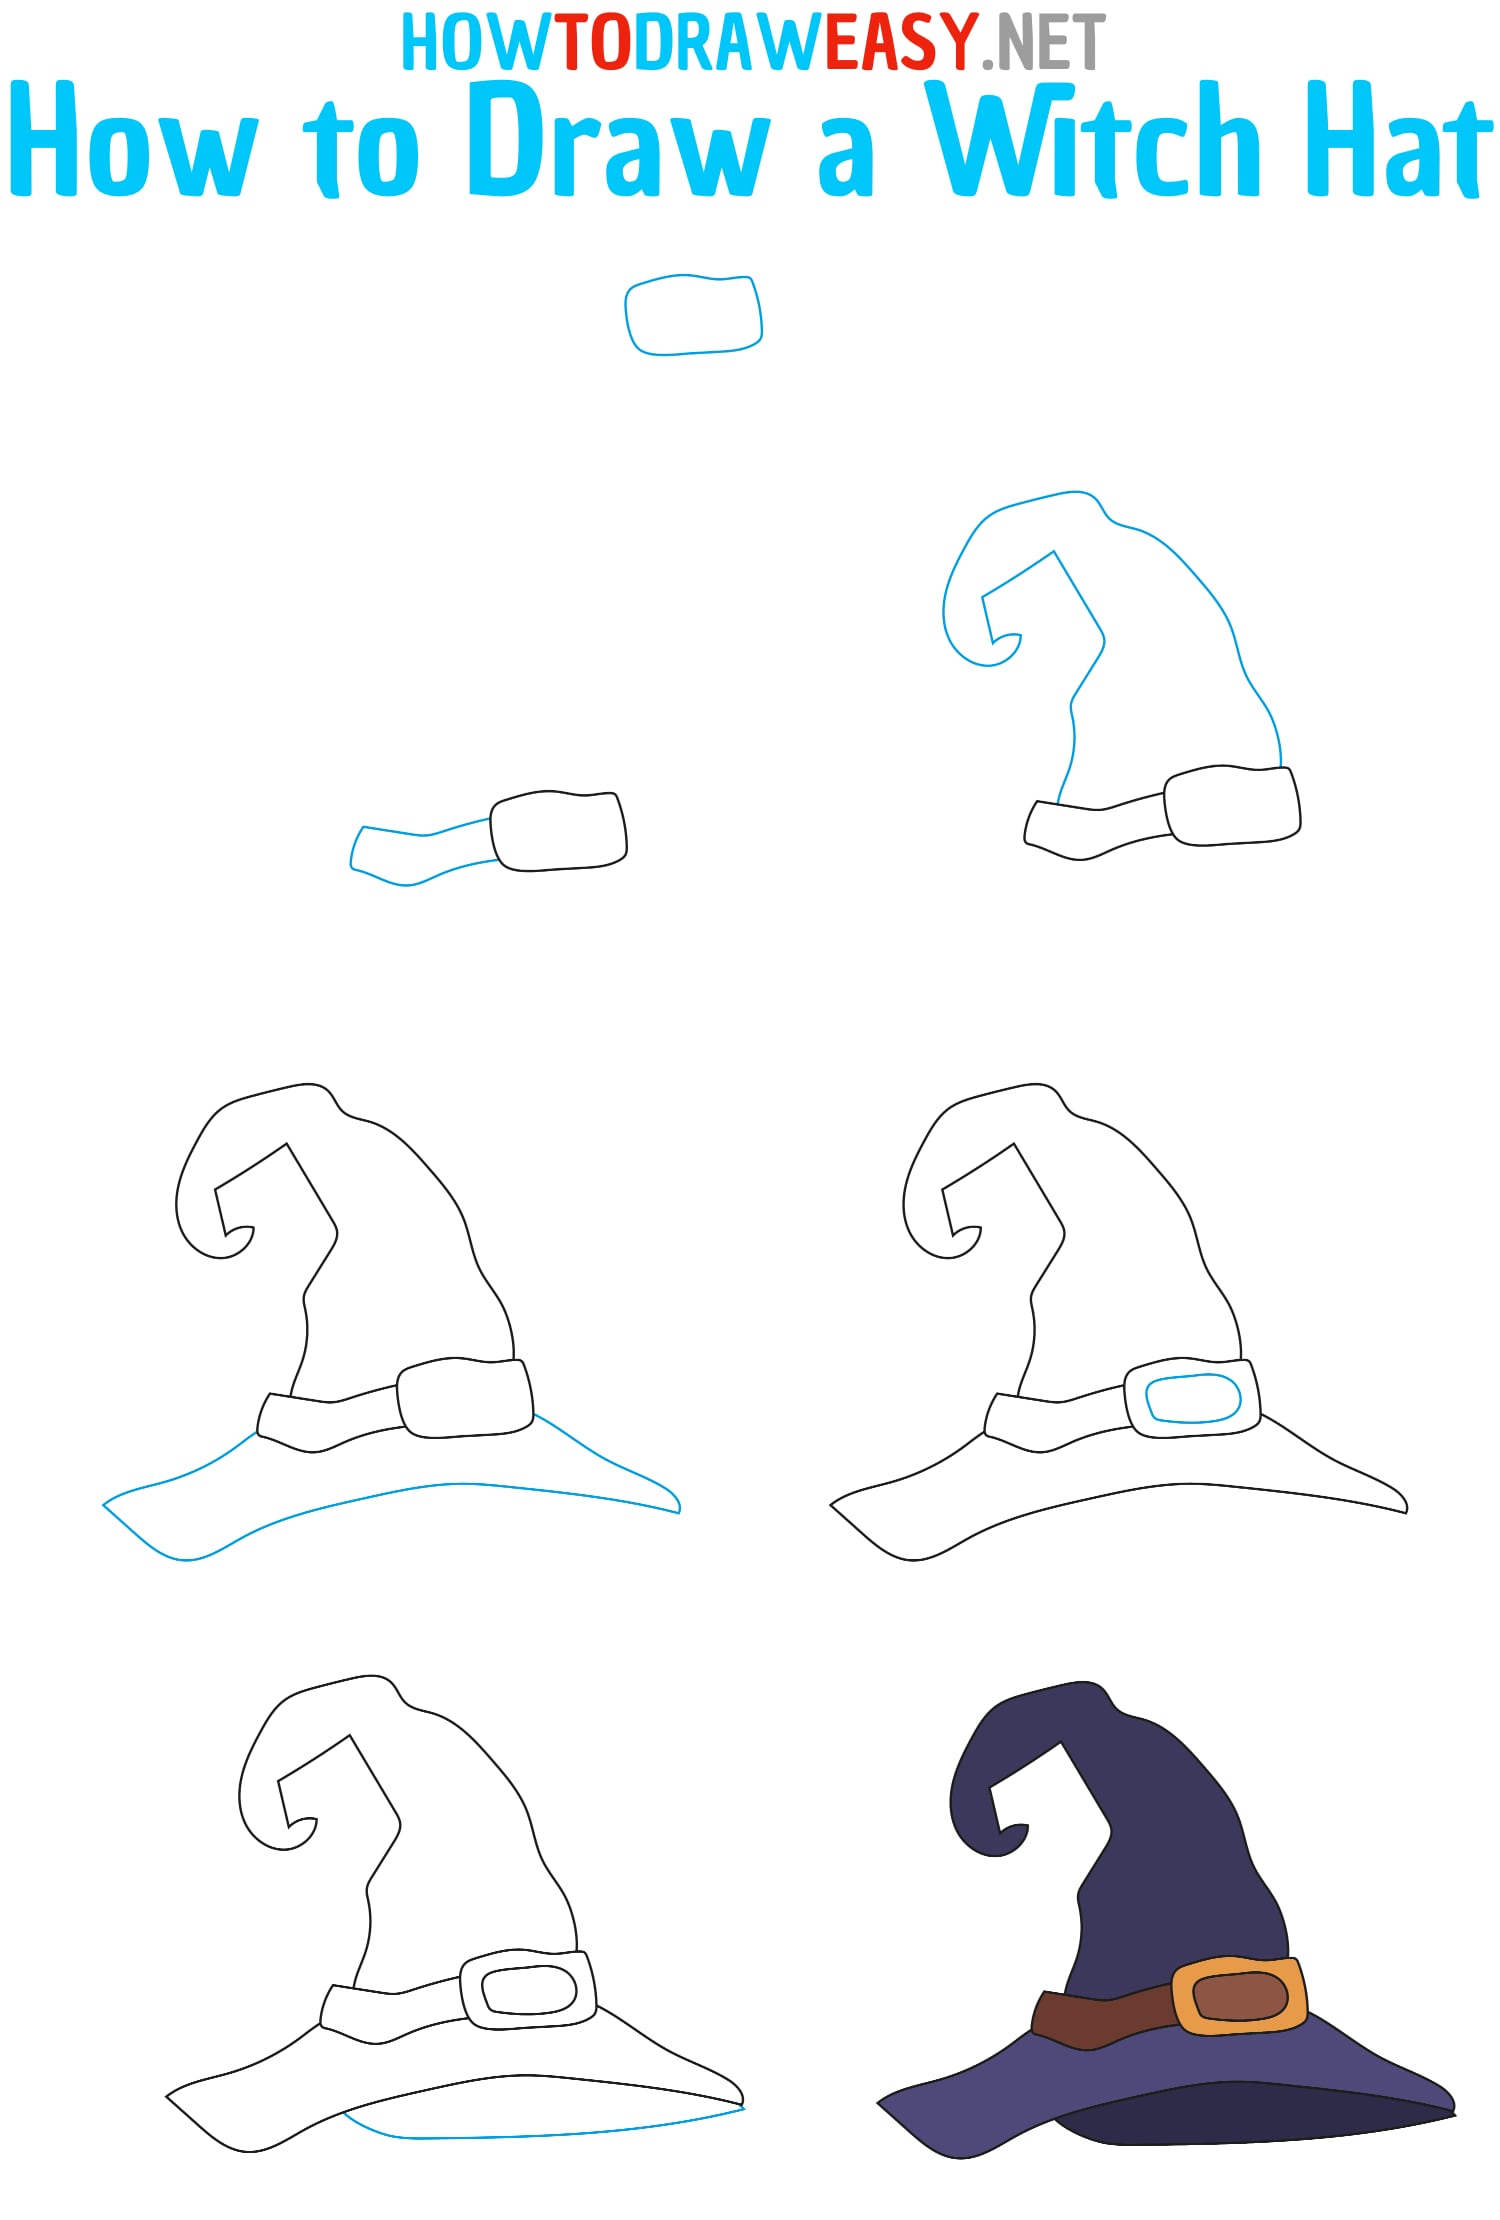 How to Draw a Witch Hat Step by Step